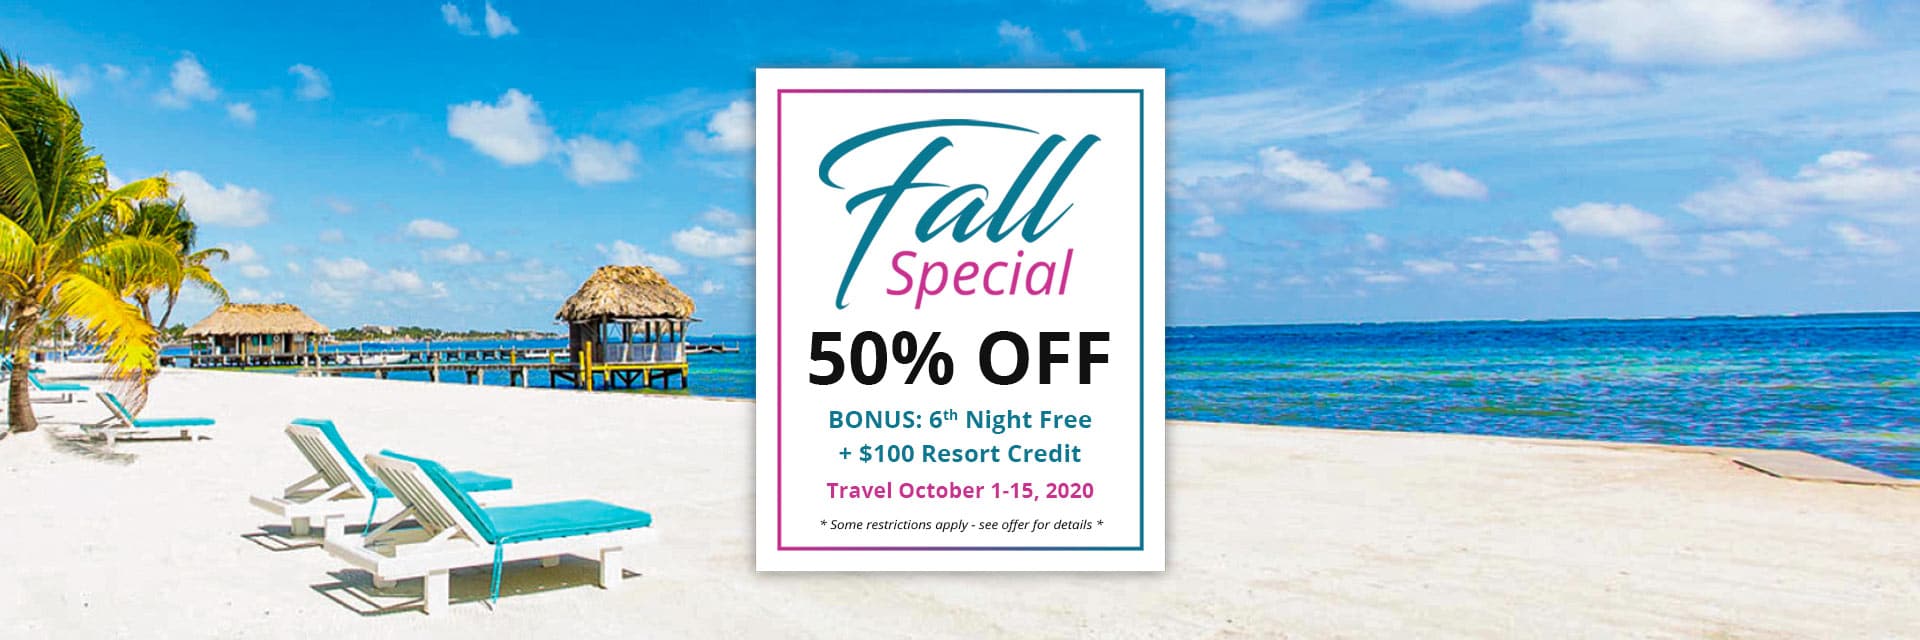 Victoria House Resort & Spa Fall Special